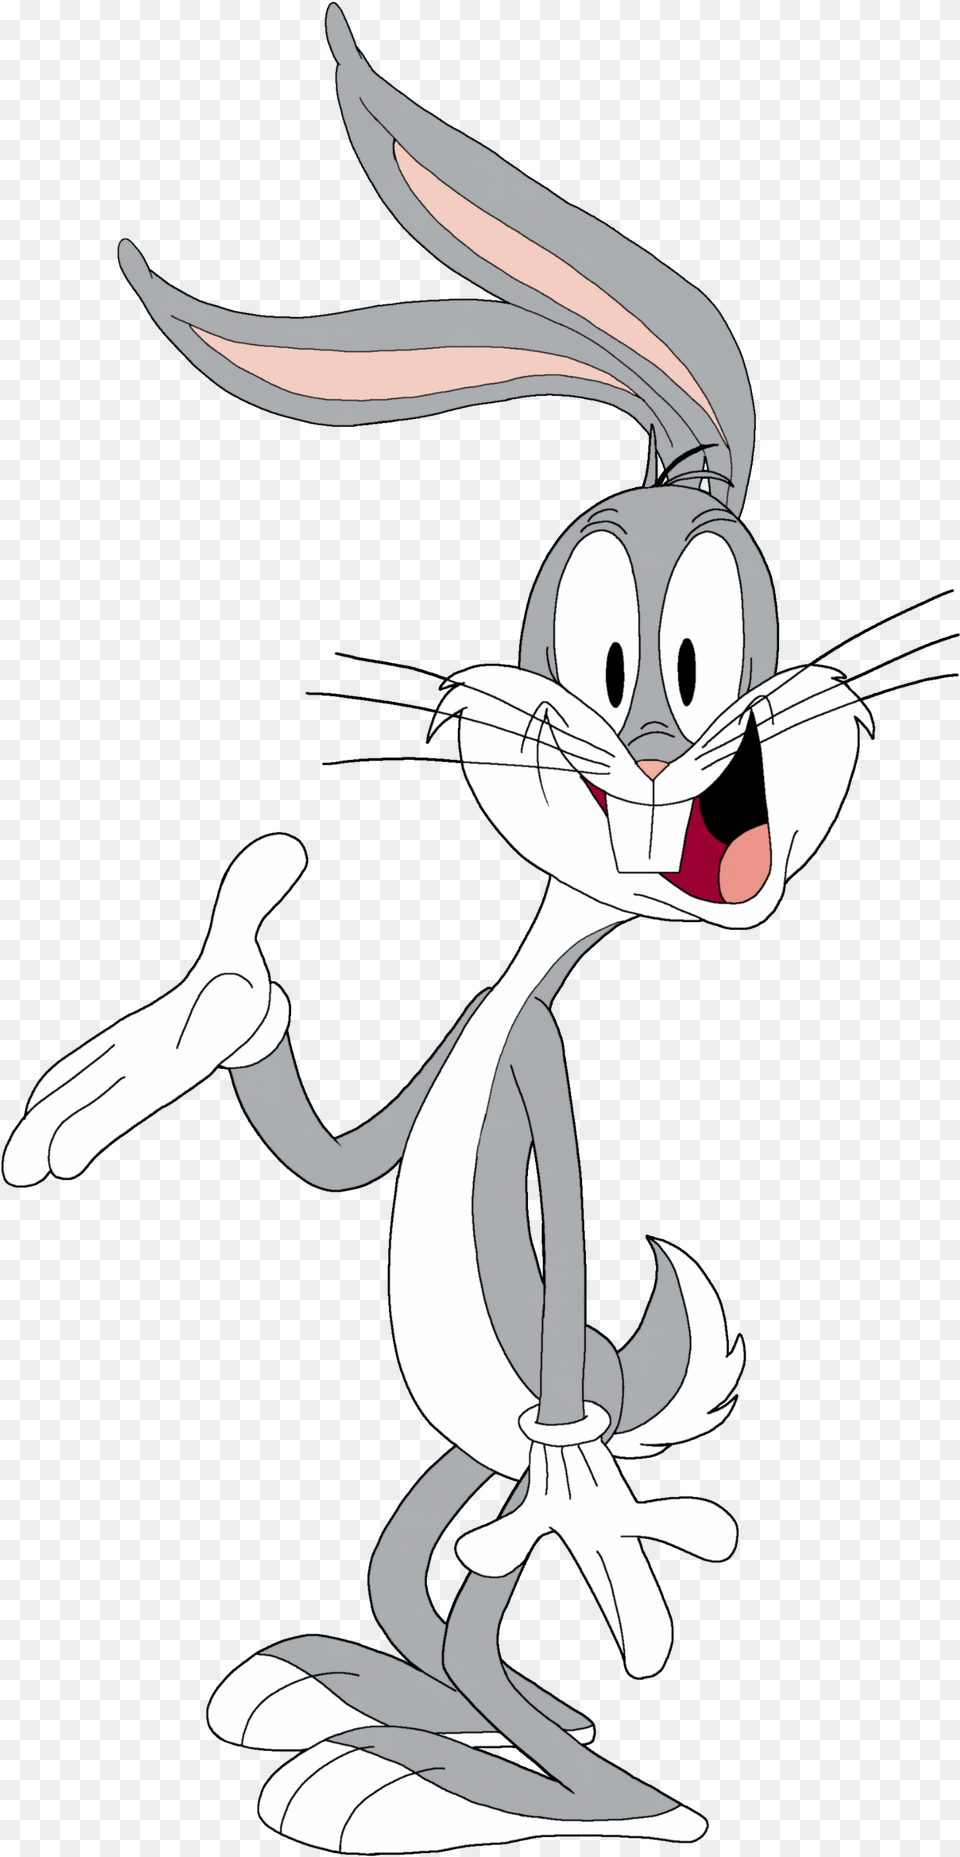 Bugs Bunny Elmer Fudd Cartoon Drawing Looney Tunes Wile E Coyote Funny, Book, Comics, Publication, Baby Free Png